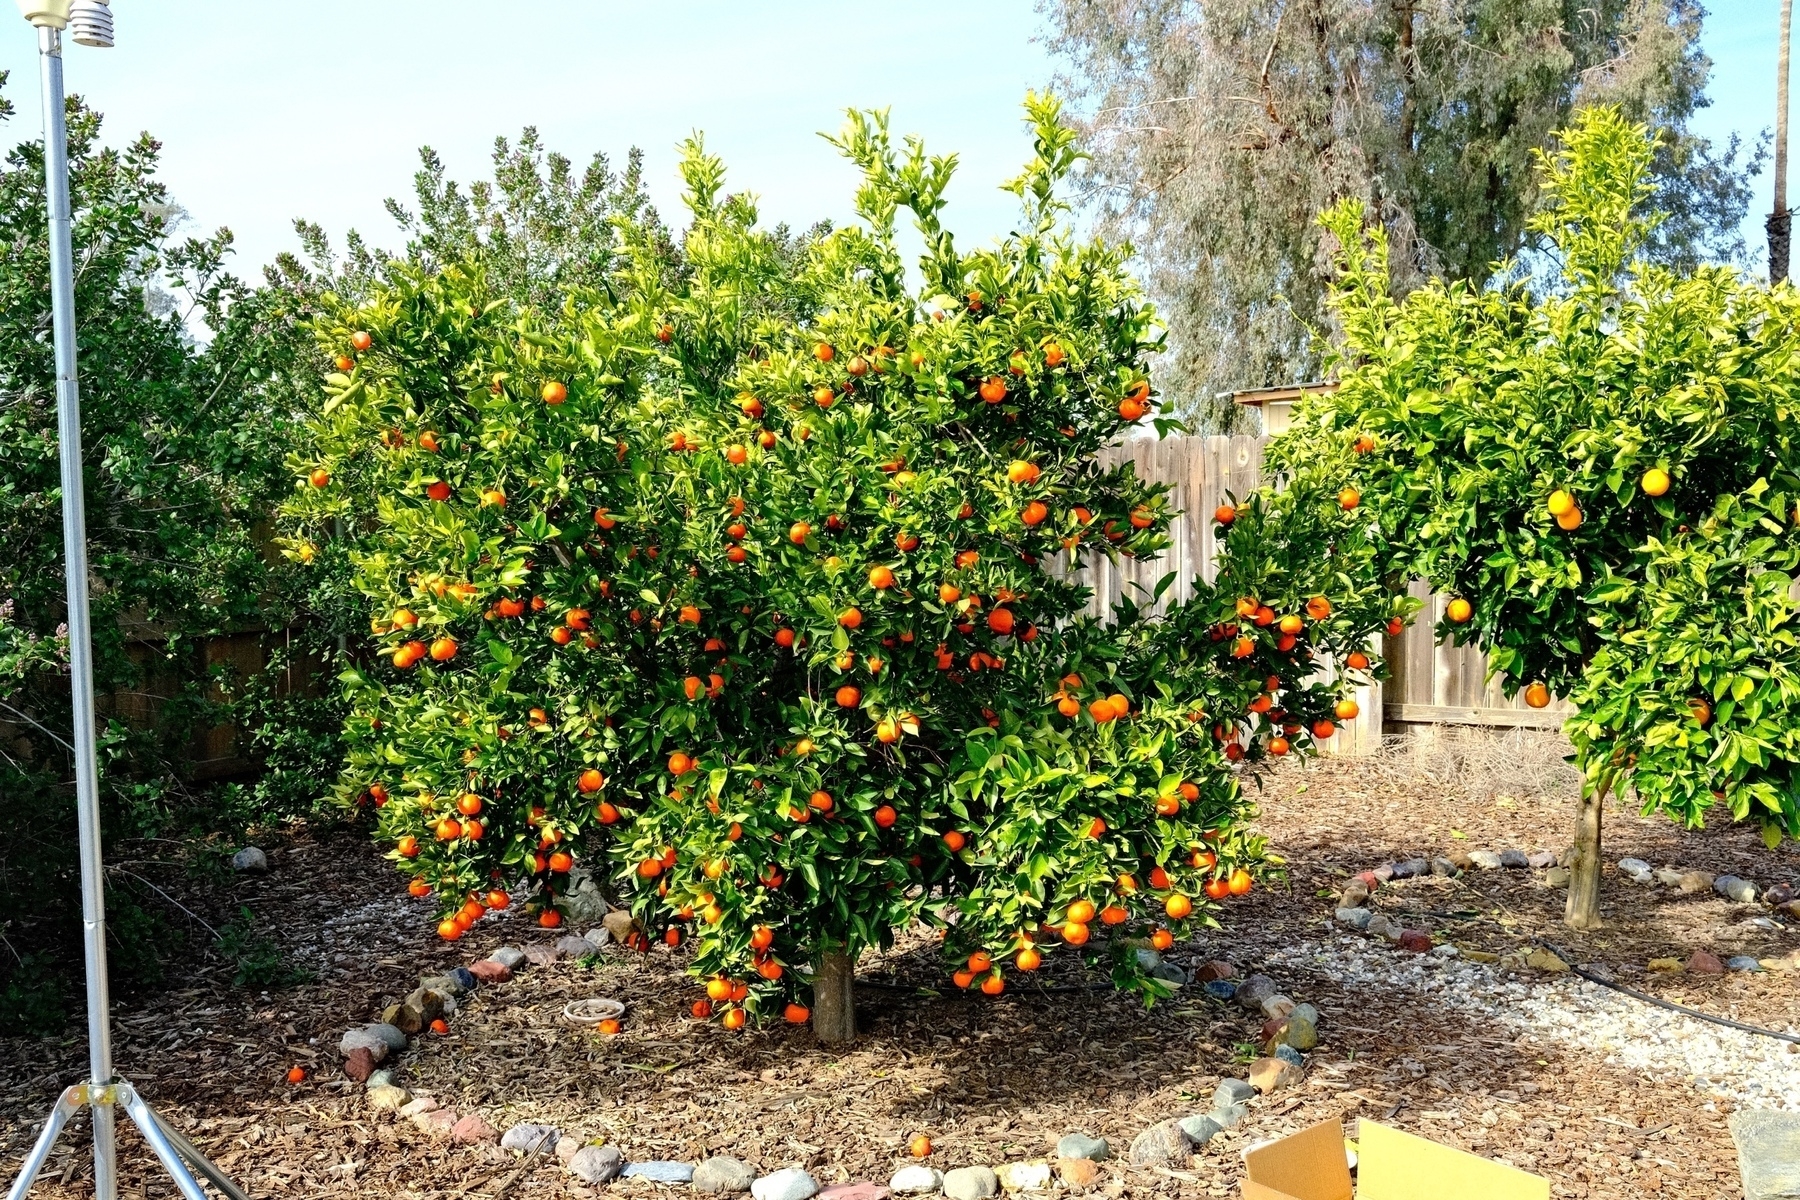 A backyard with a mandarin tree loaded with fruit and a Valencia tree. it's extremely green. Bark covers the ground and there's a weather station nearby.